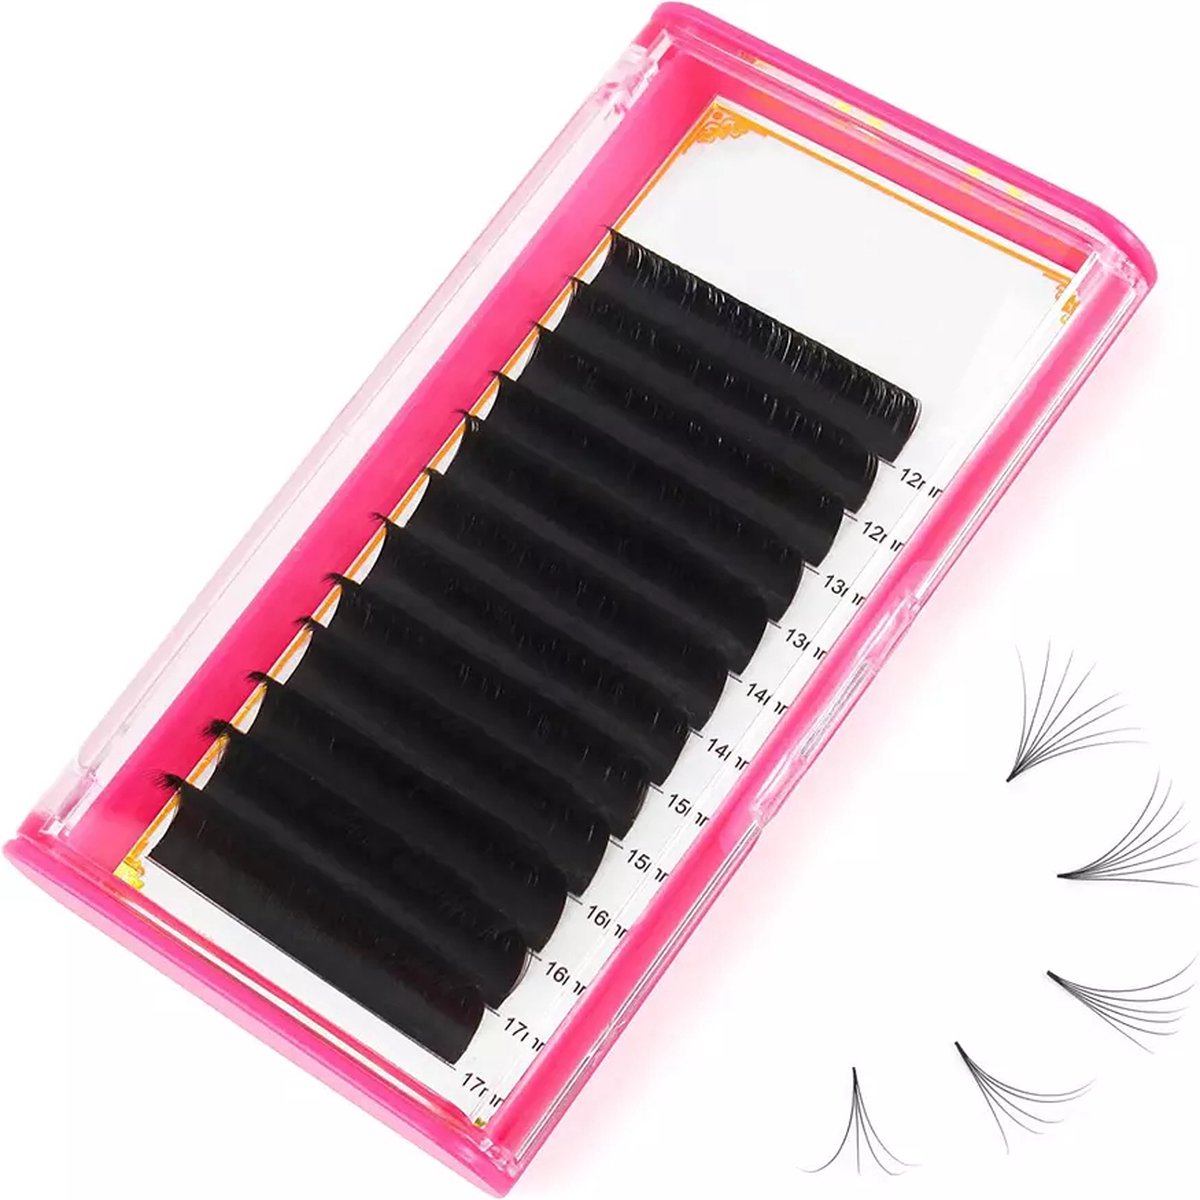 Vardaan wimperextensions - Lashes C 0.05 - 8 mm -Nep wimpers - Valse wimpers - Zwart - wimper extension - Stijlvol - Fake eyelashes